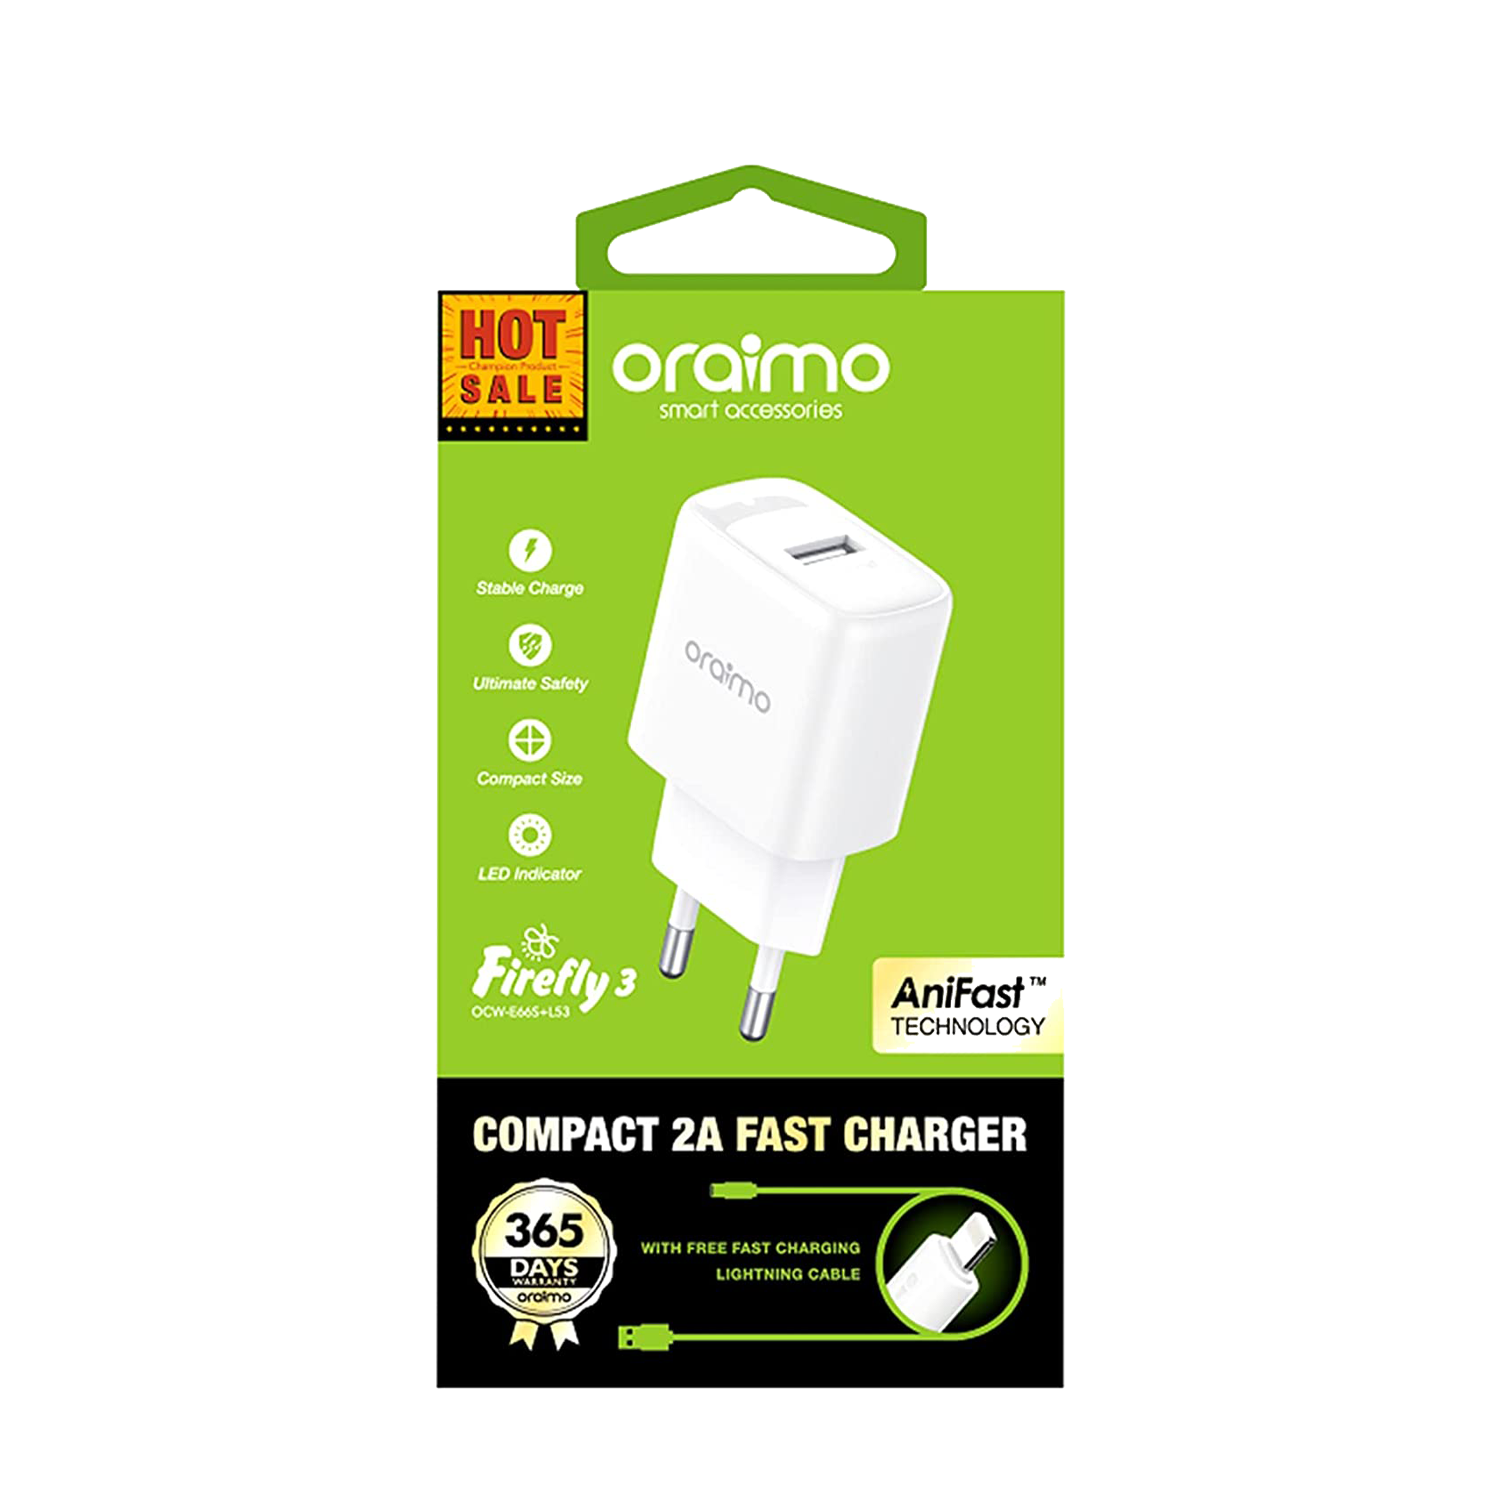 Oraimo OCW-E66S+C53 Fast Charger Firefly USB 10w Fast Charging Kit - Type C